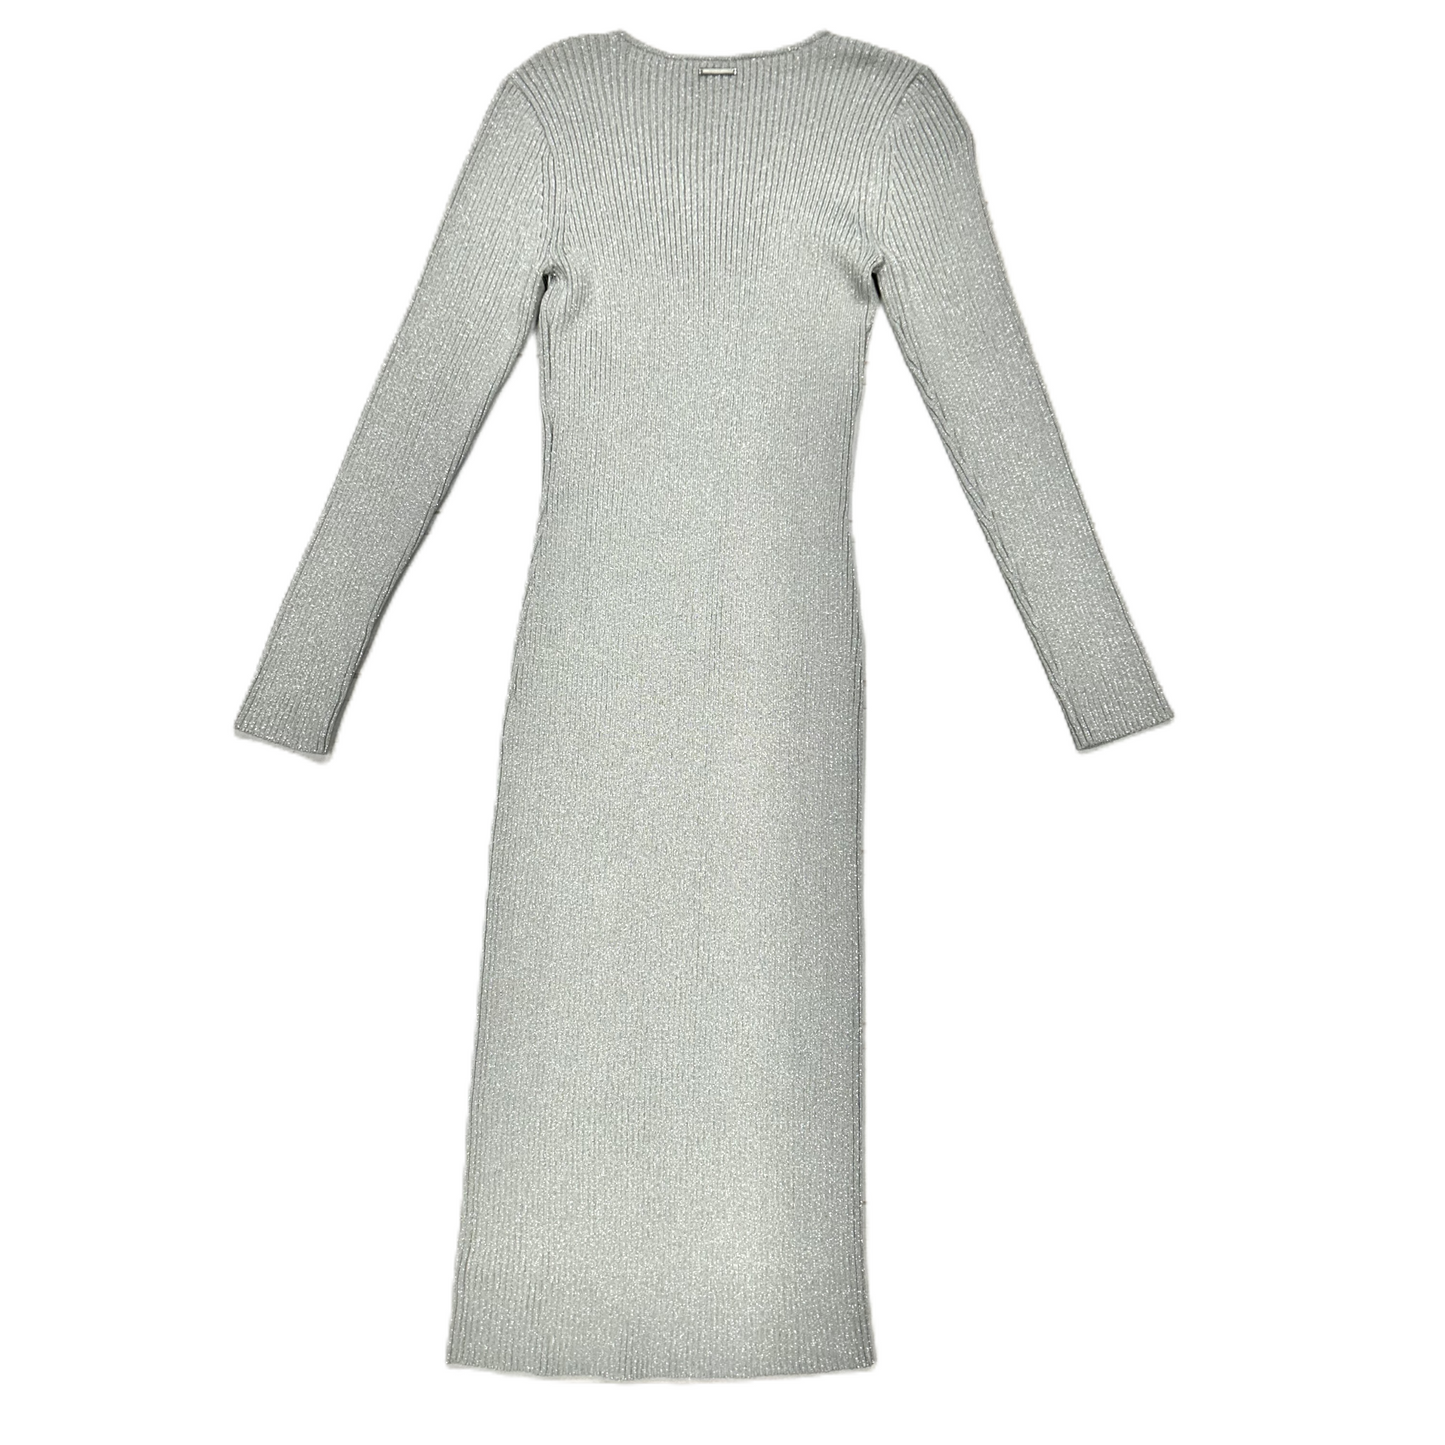 Silver Dress Party Long By Michael By Michael Kors, Size: M